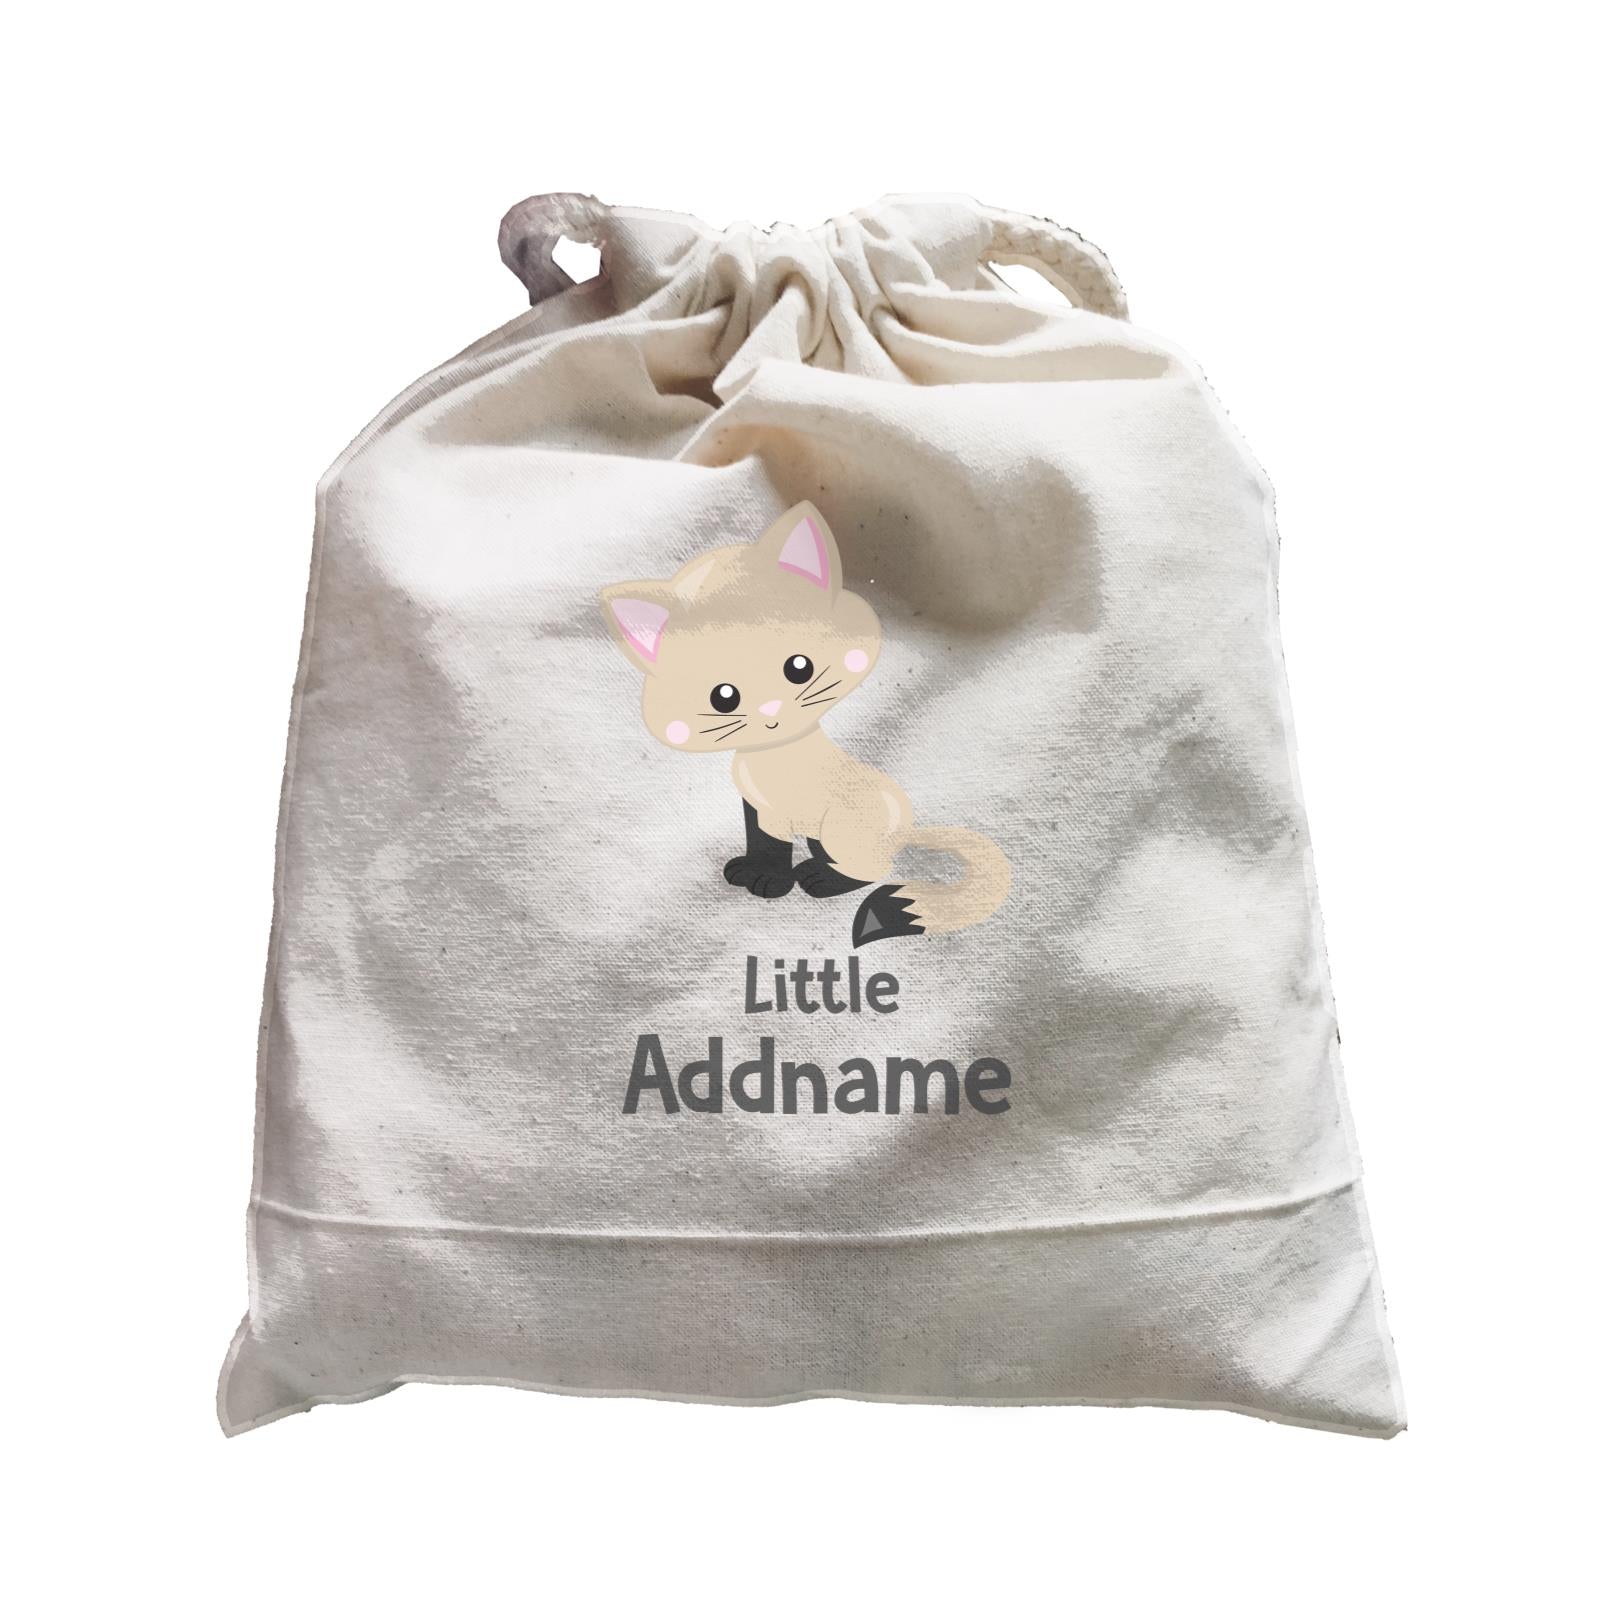 Adorable Cats Light Brown Cat with Black Legs Little Addname Satchel